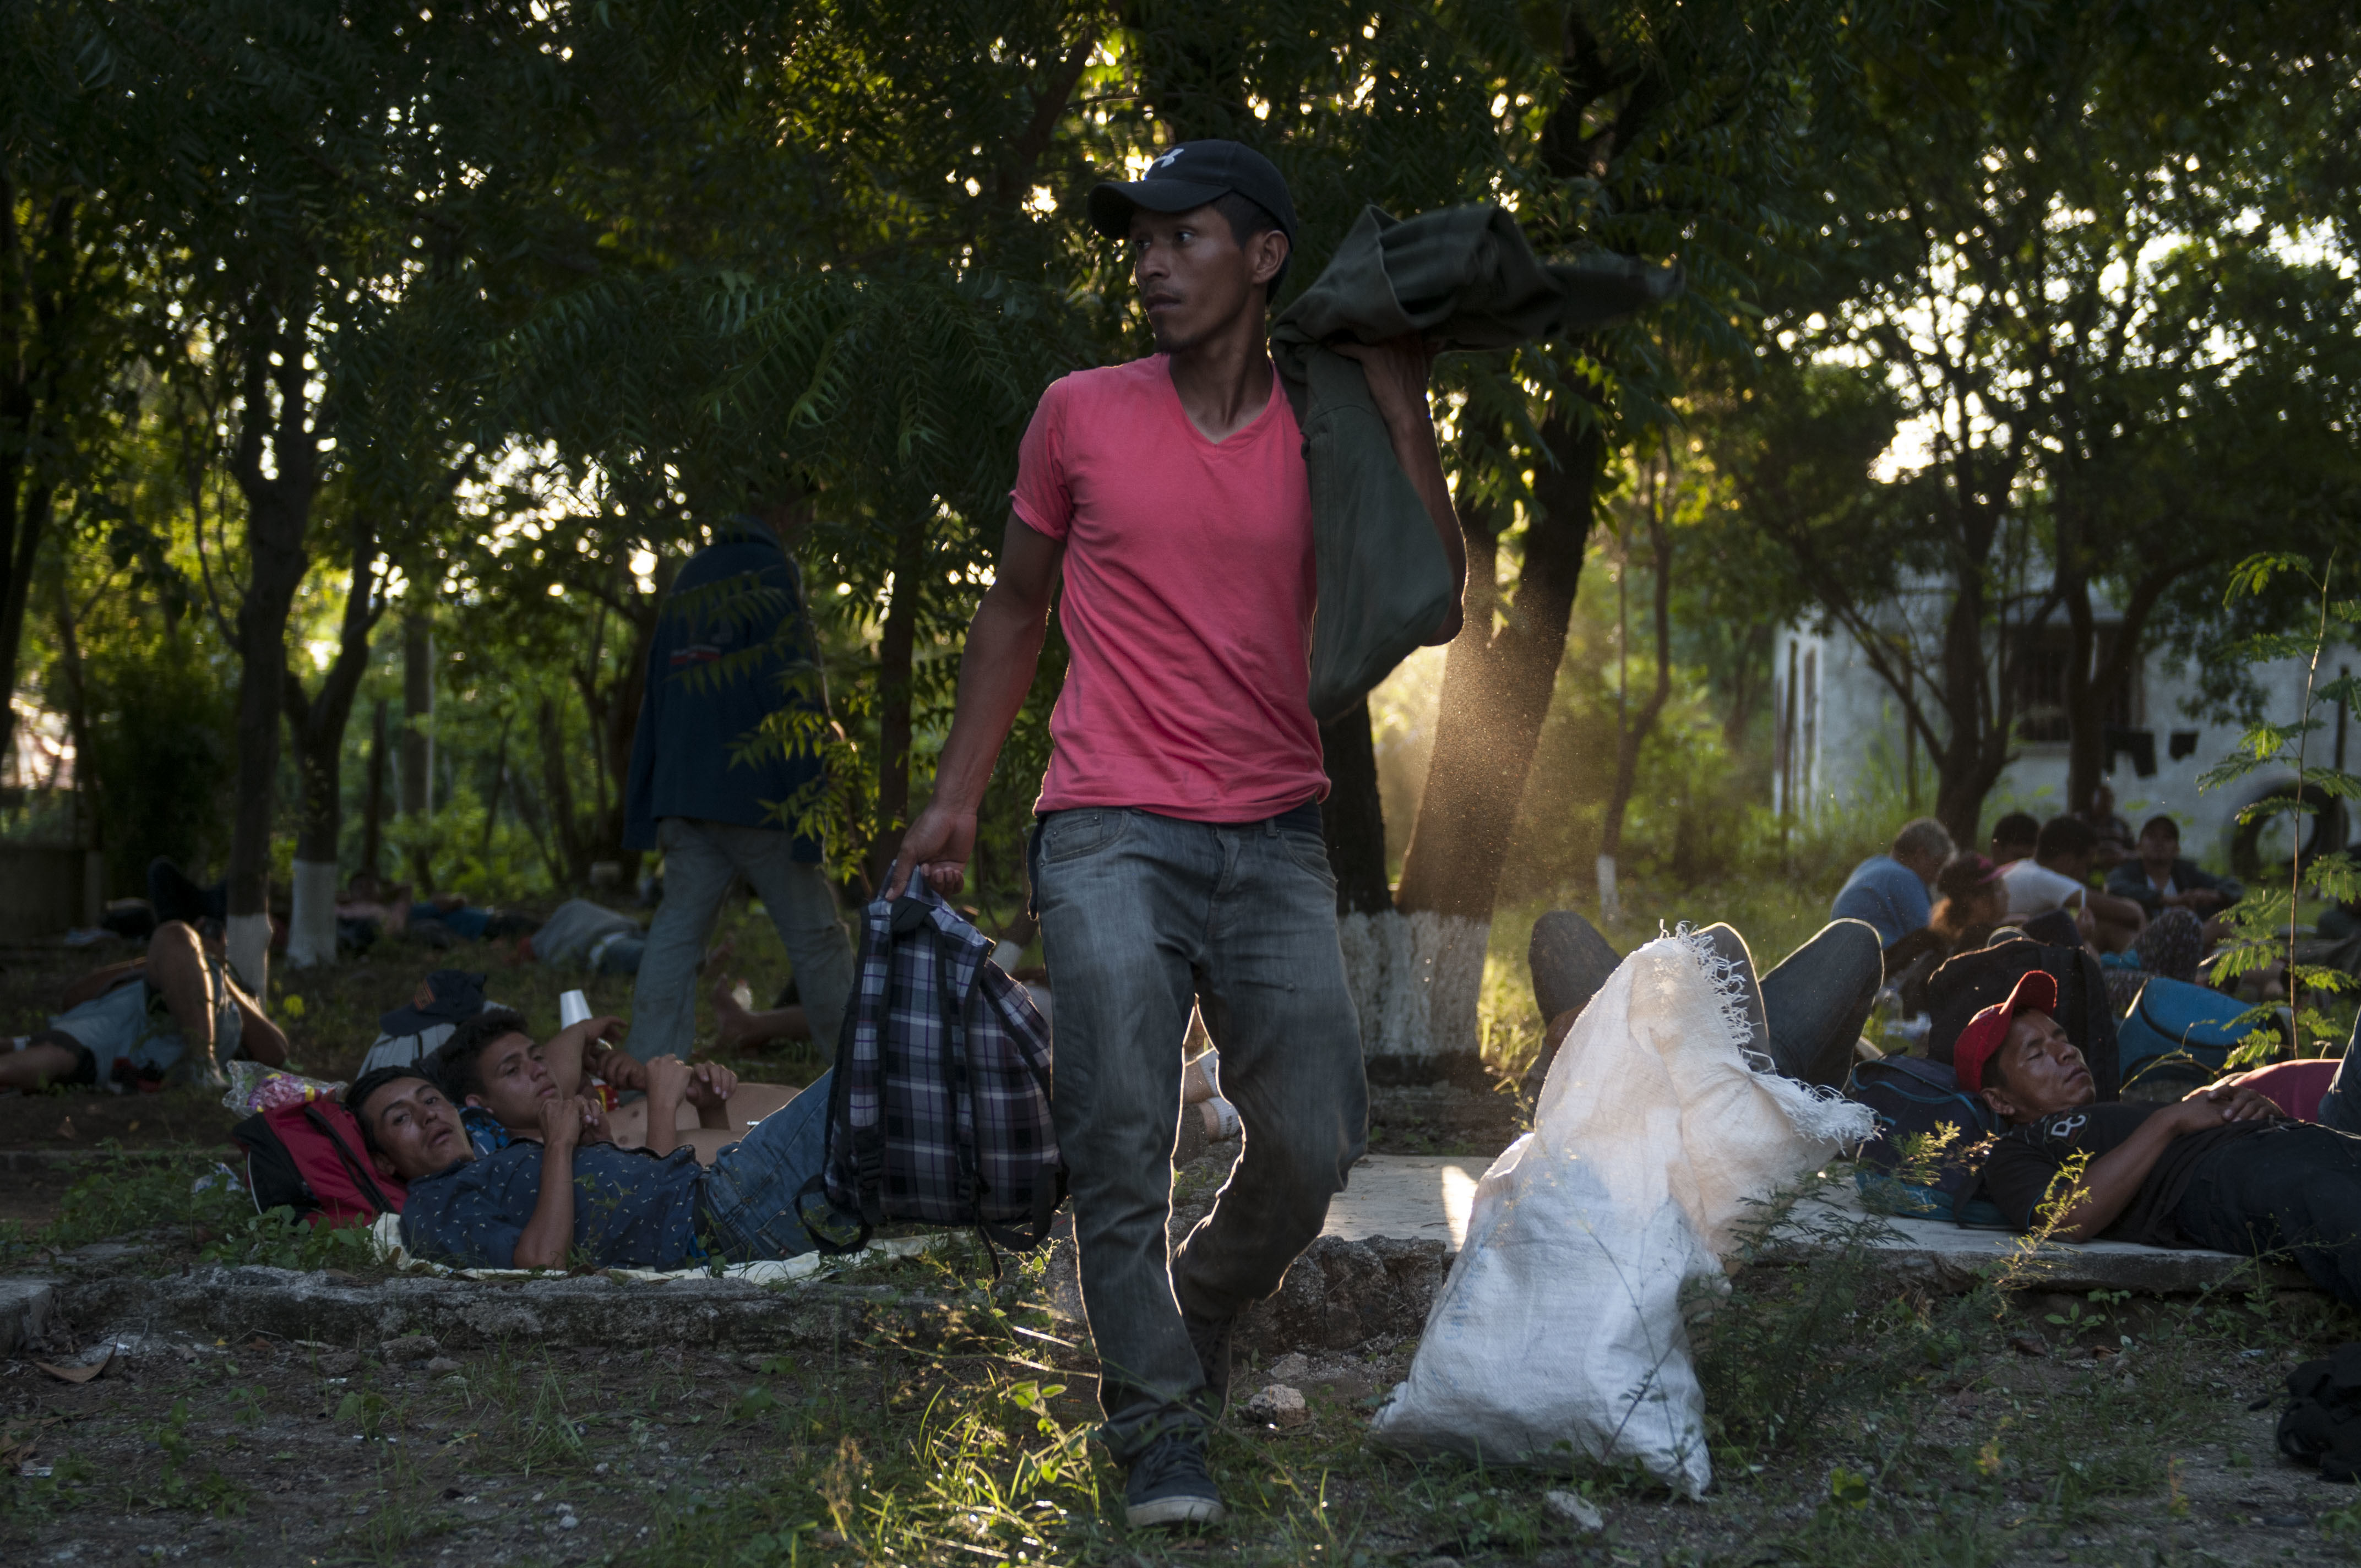 Honduran migrants walking in a caravan that aims to reach the U.S., rest in an abandoned spa resort near San Cristobal Acasaguastian, about 67 miles northeast of Guatemala City, Guatemala, Wednesday, Oct. 24, 2018. This new group of a few hundred Honduran migrants are behind the first caravan of Central American migrants that has swelled to thousands and is currently traveling through Mexico. (AP Photo/Oliver de Ros)